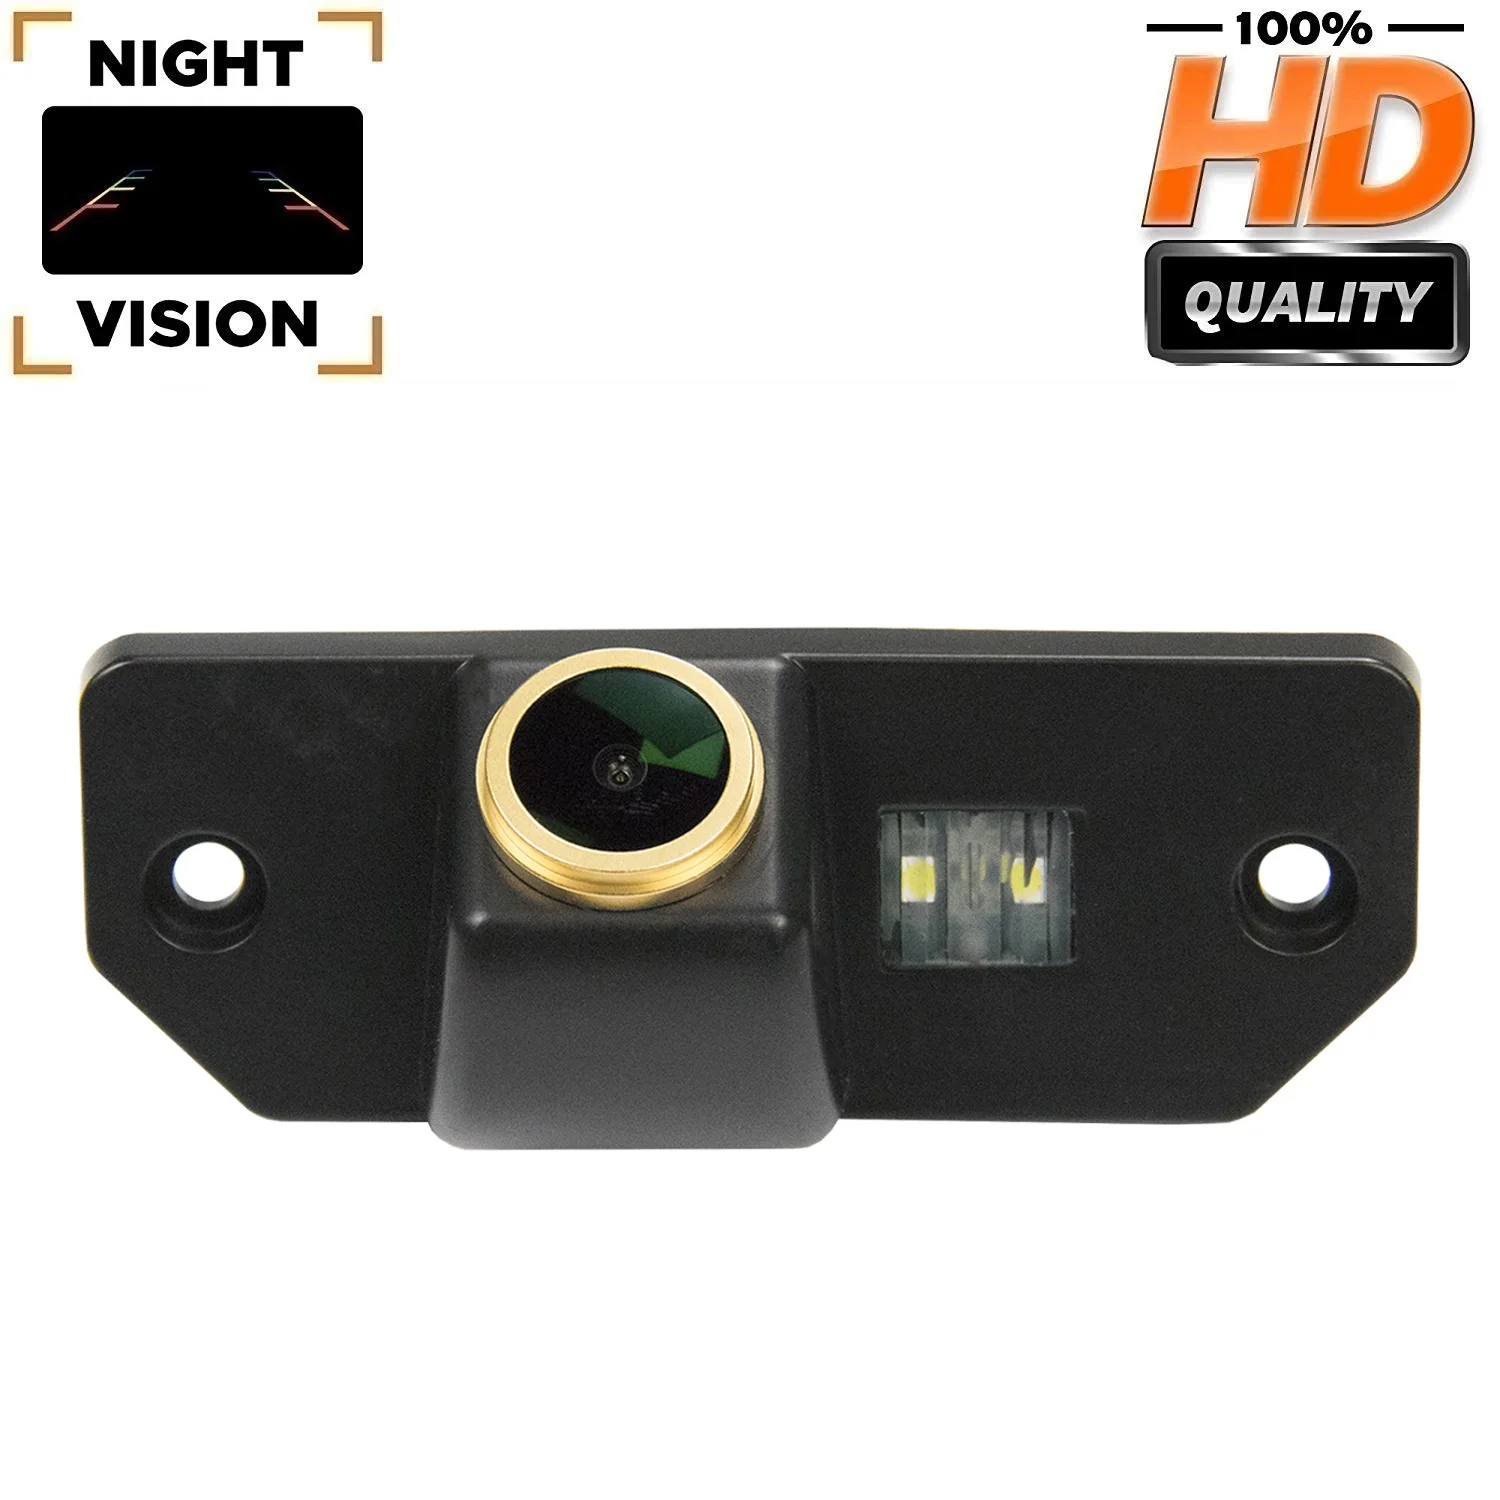 

HD 1280*720p Rear View Camera for FORD Mondeo FORD Focus 2 Mk3 Mk4 C-Max 2000-2012, Reversing Backup Camera License Plate Light